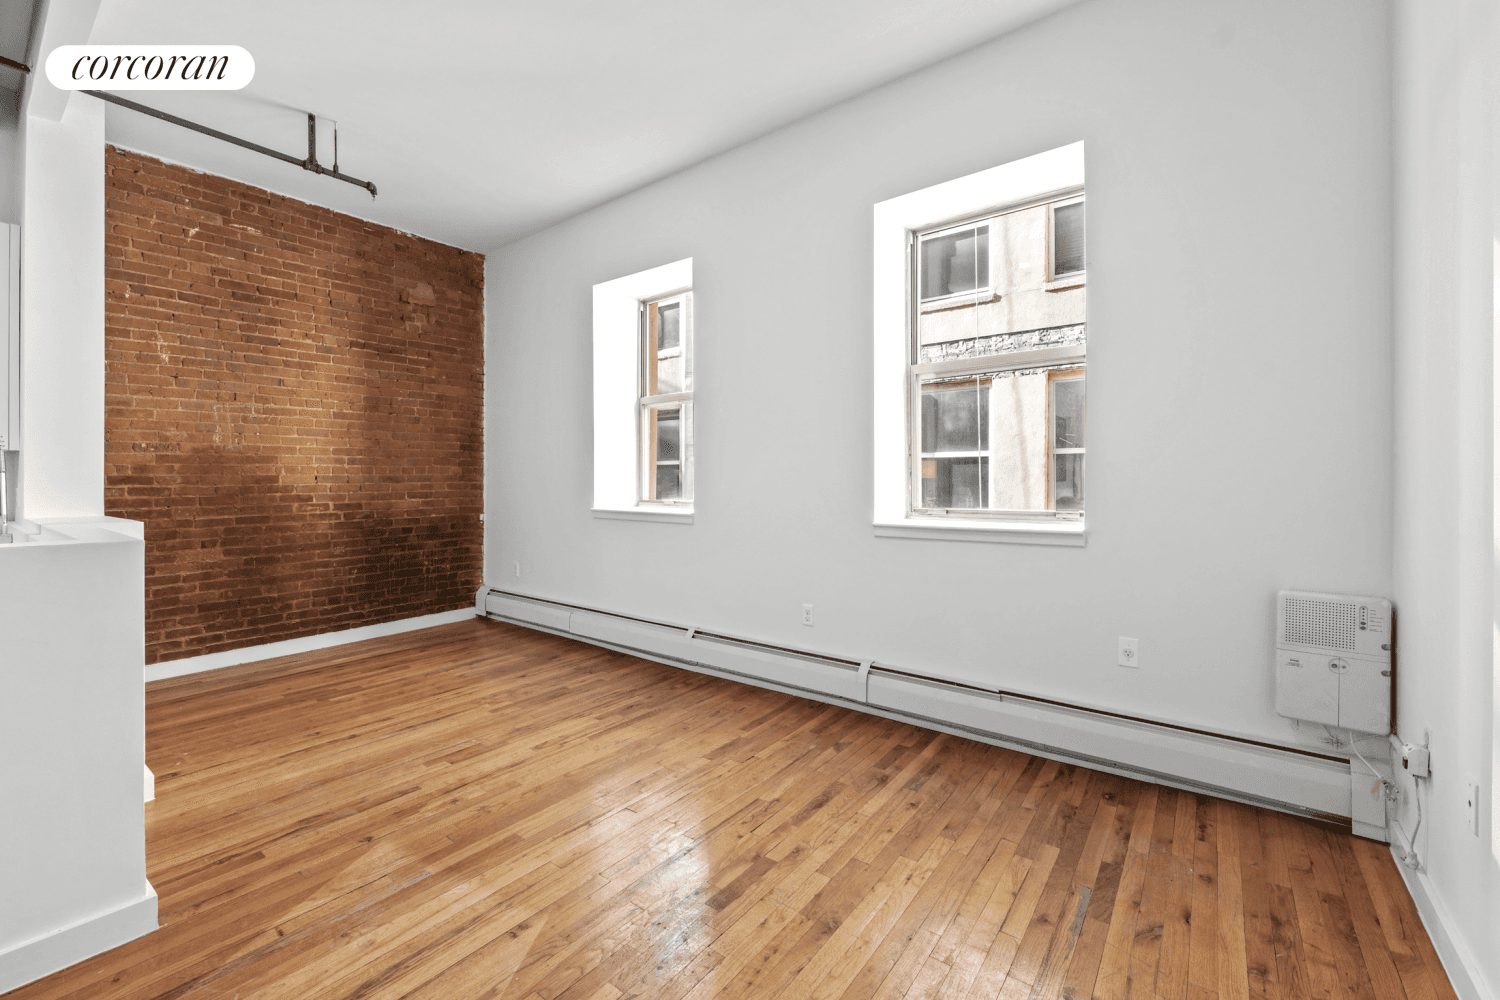 Fully renovated 1B 1B with king size bedroom, great closet space and in unit laundry.